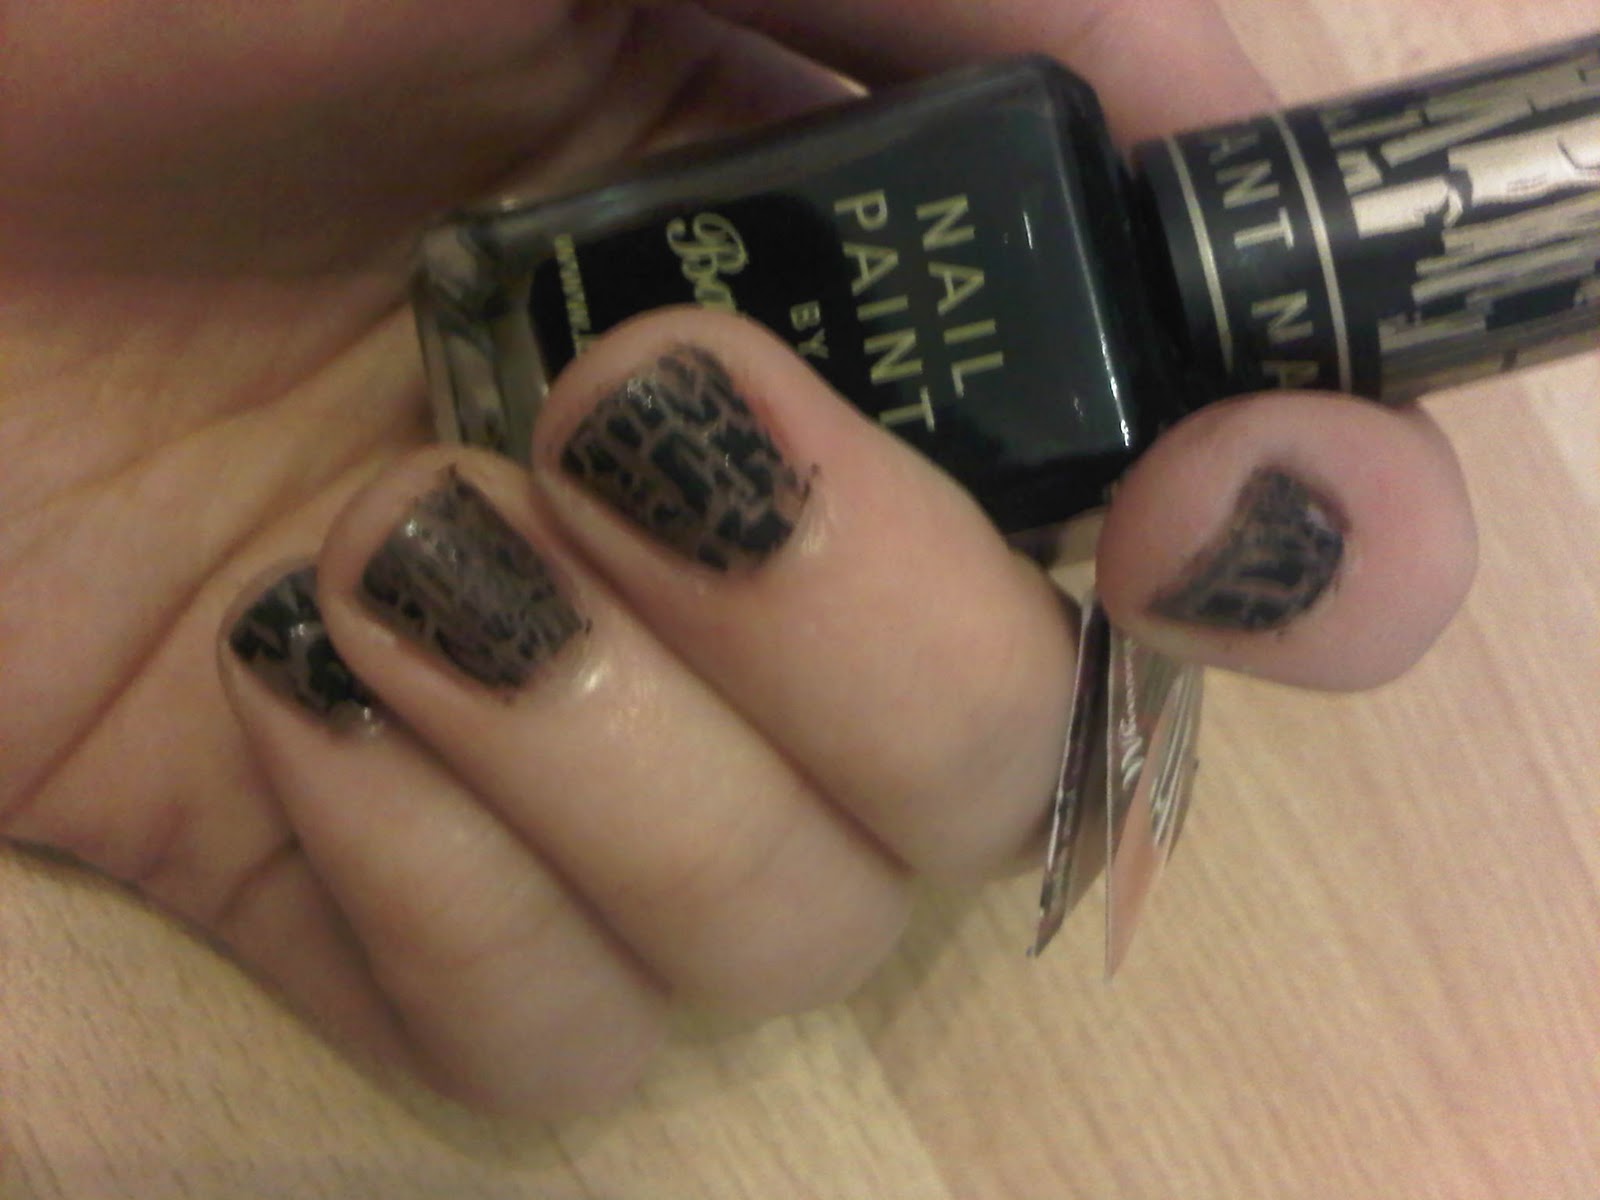 NEW Barry M Instant Nail Effects Animal Print